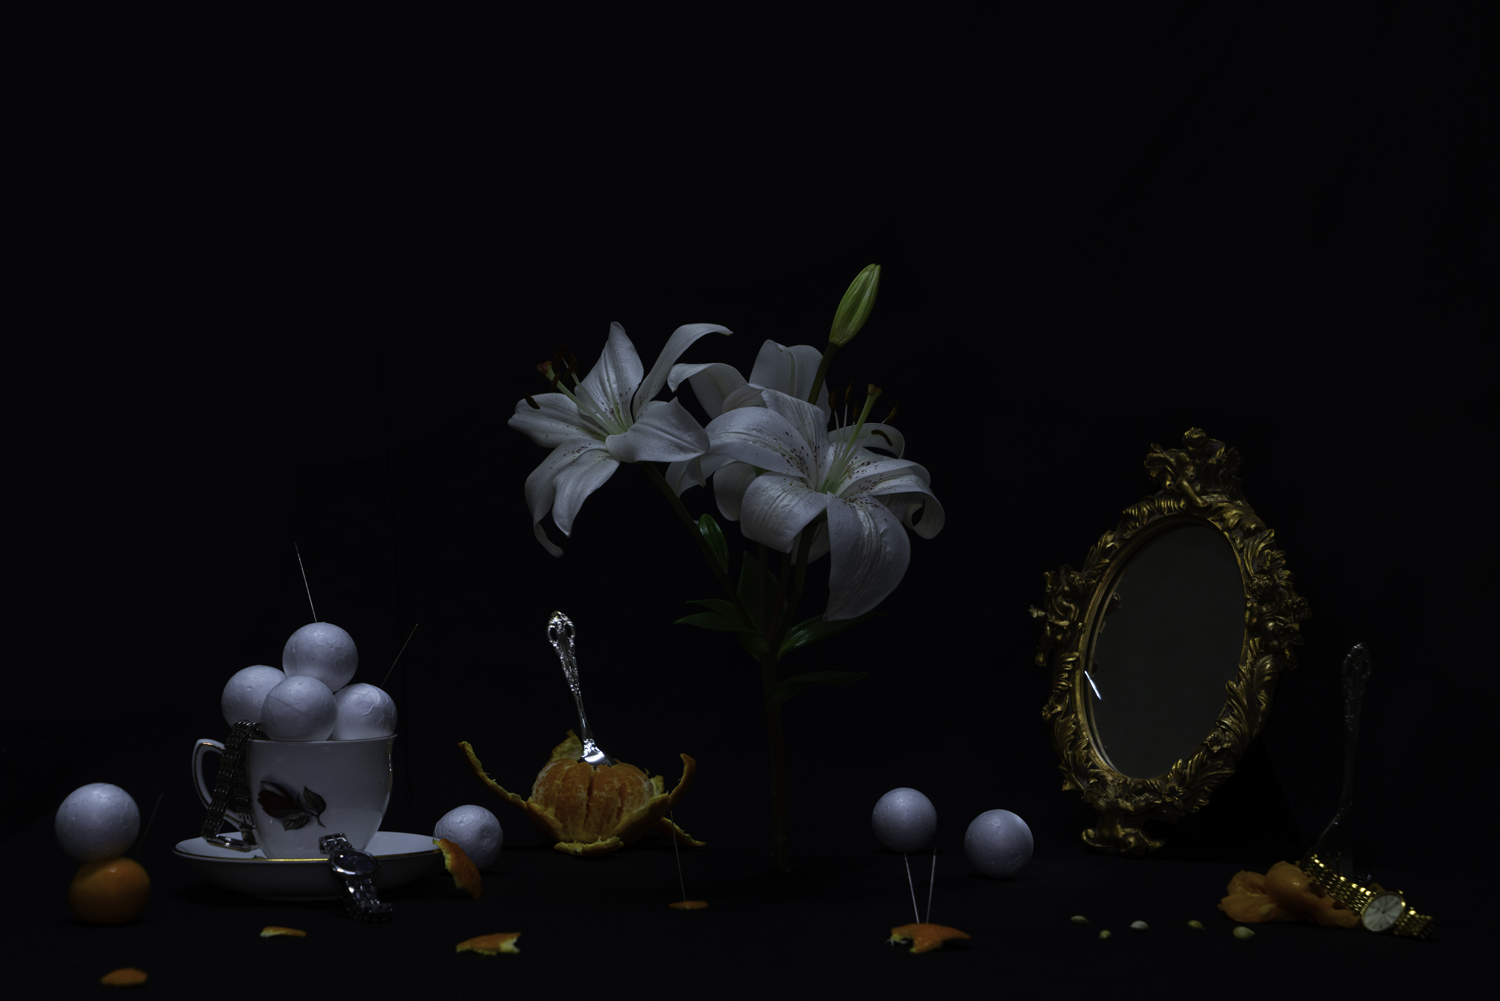 Dark digital photograph of table top with white lilies in vase with scattered food items, teacup, polystyrene balls and mirror.